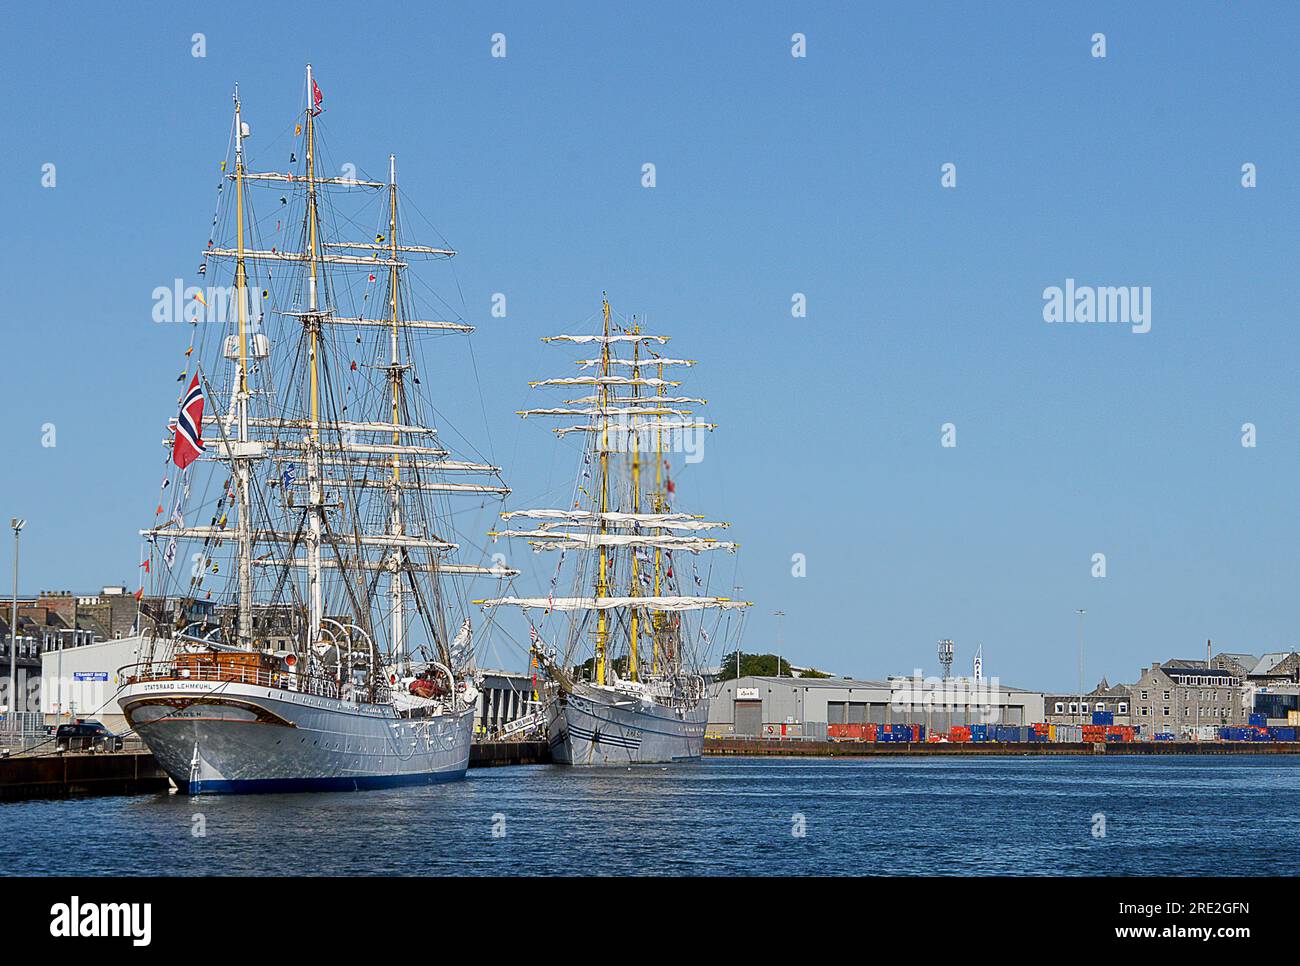 ABERDEEN, SCOTLAND - 22 JULY 2023: The Norwegian barque Statsraad Lehmkuhl and the Indonesian Navy's Bima Suci. training sailing ships tied up at the Stock Photo